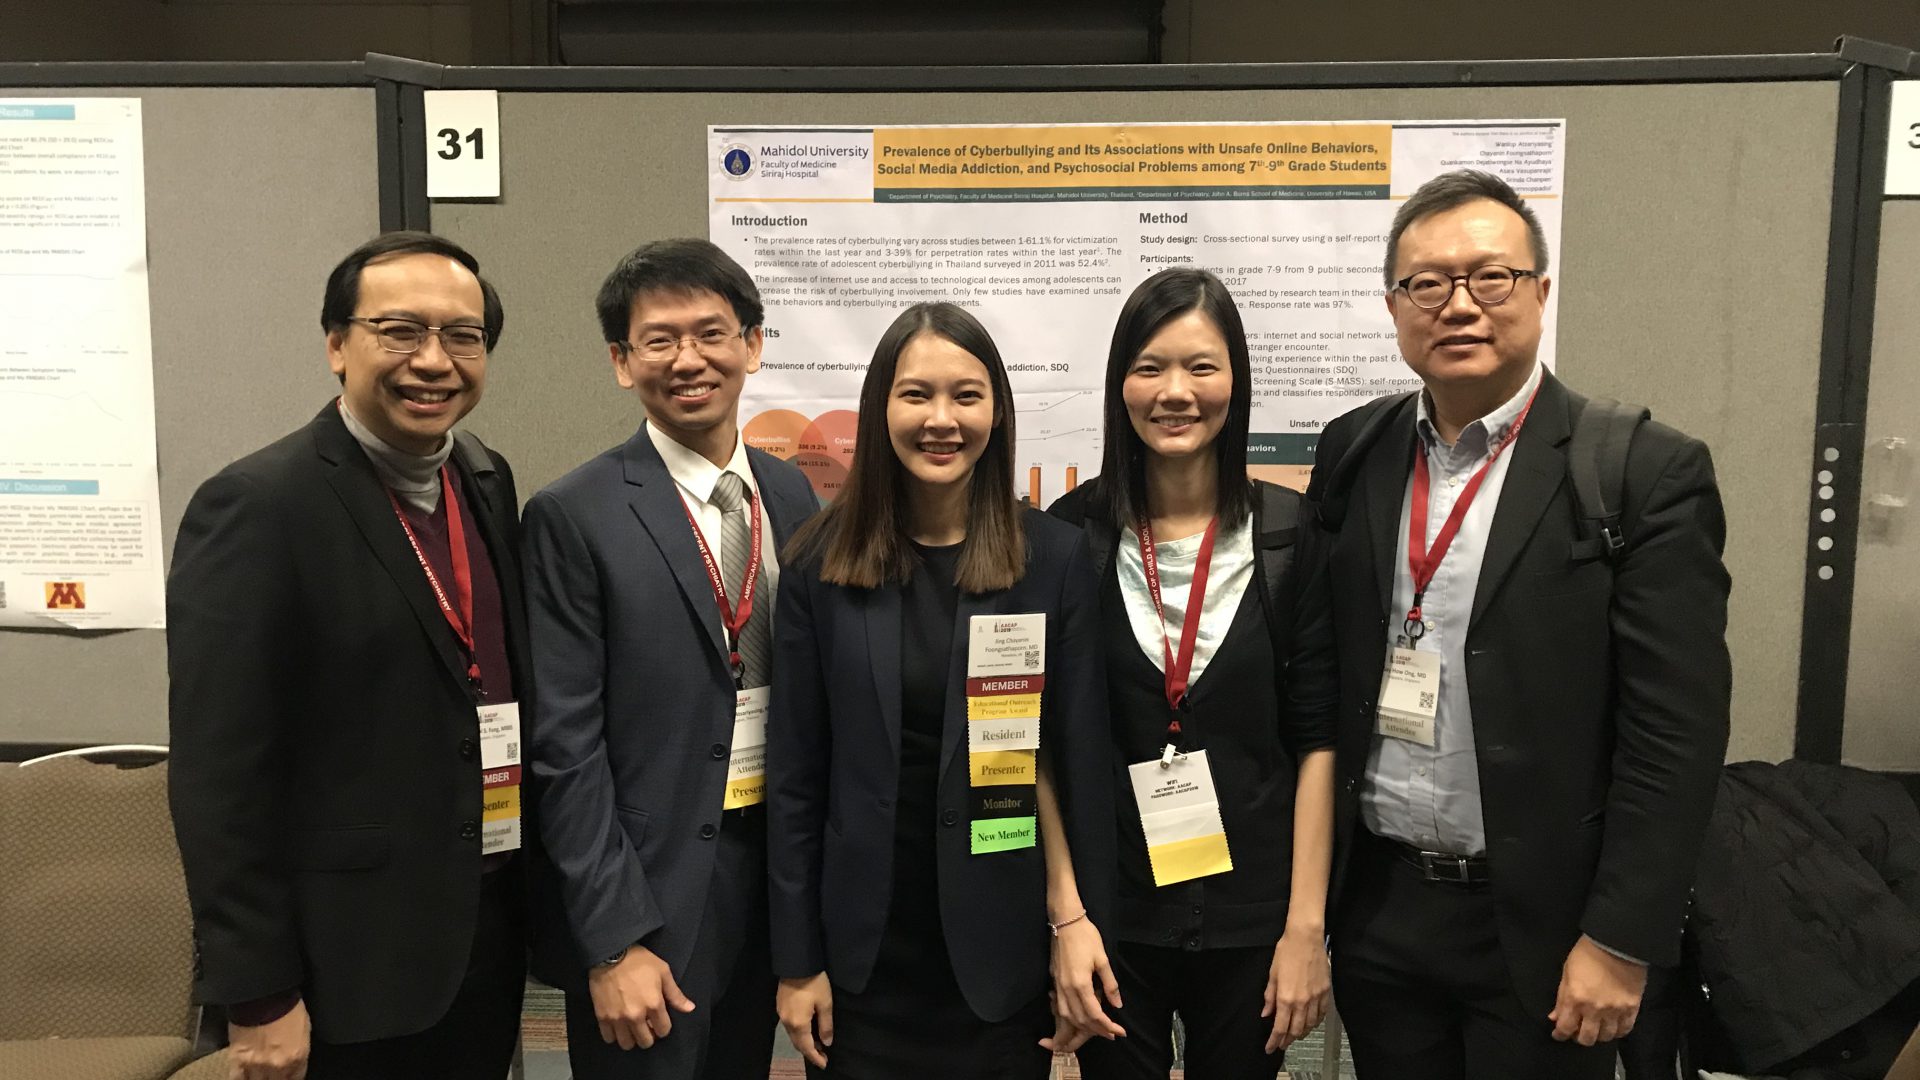 Siriraj Faculty Abroad at “66th Annual Meeting of the American Academy of Child and Adolescent Psychiatry” in USA